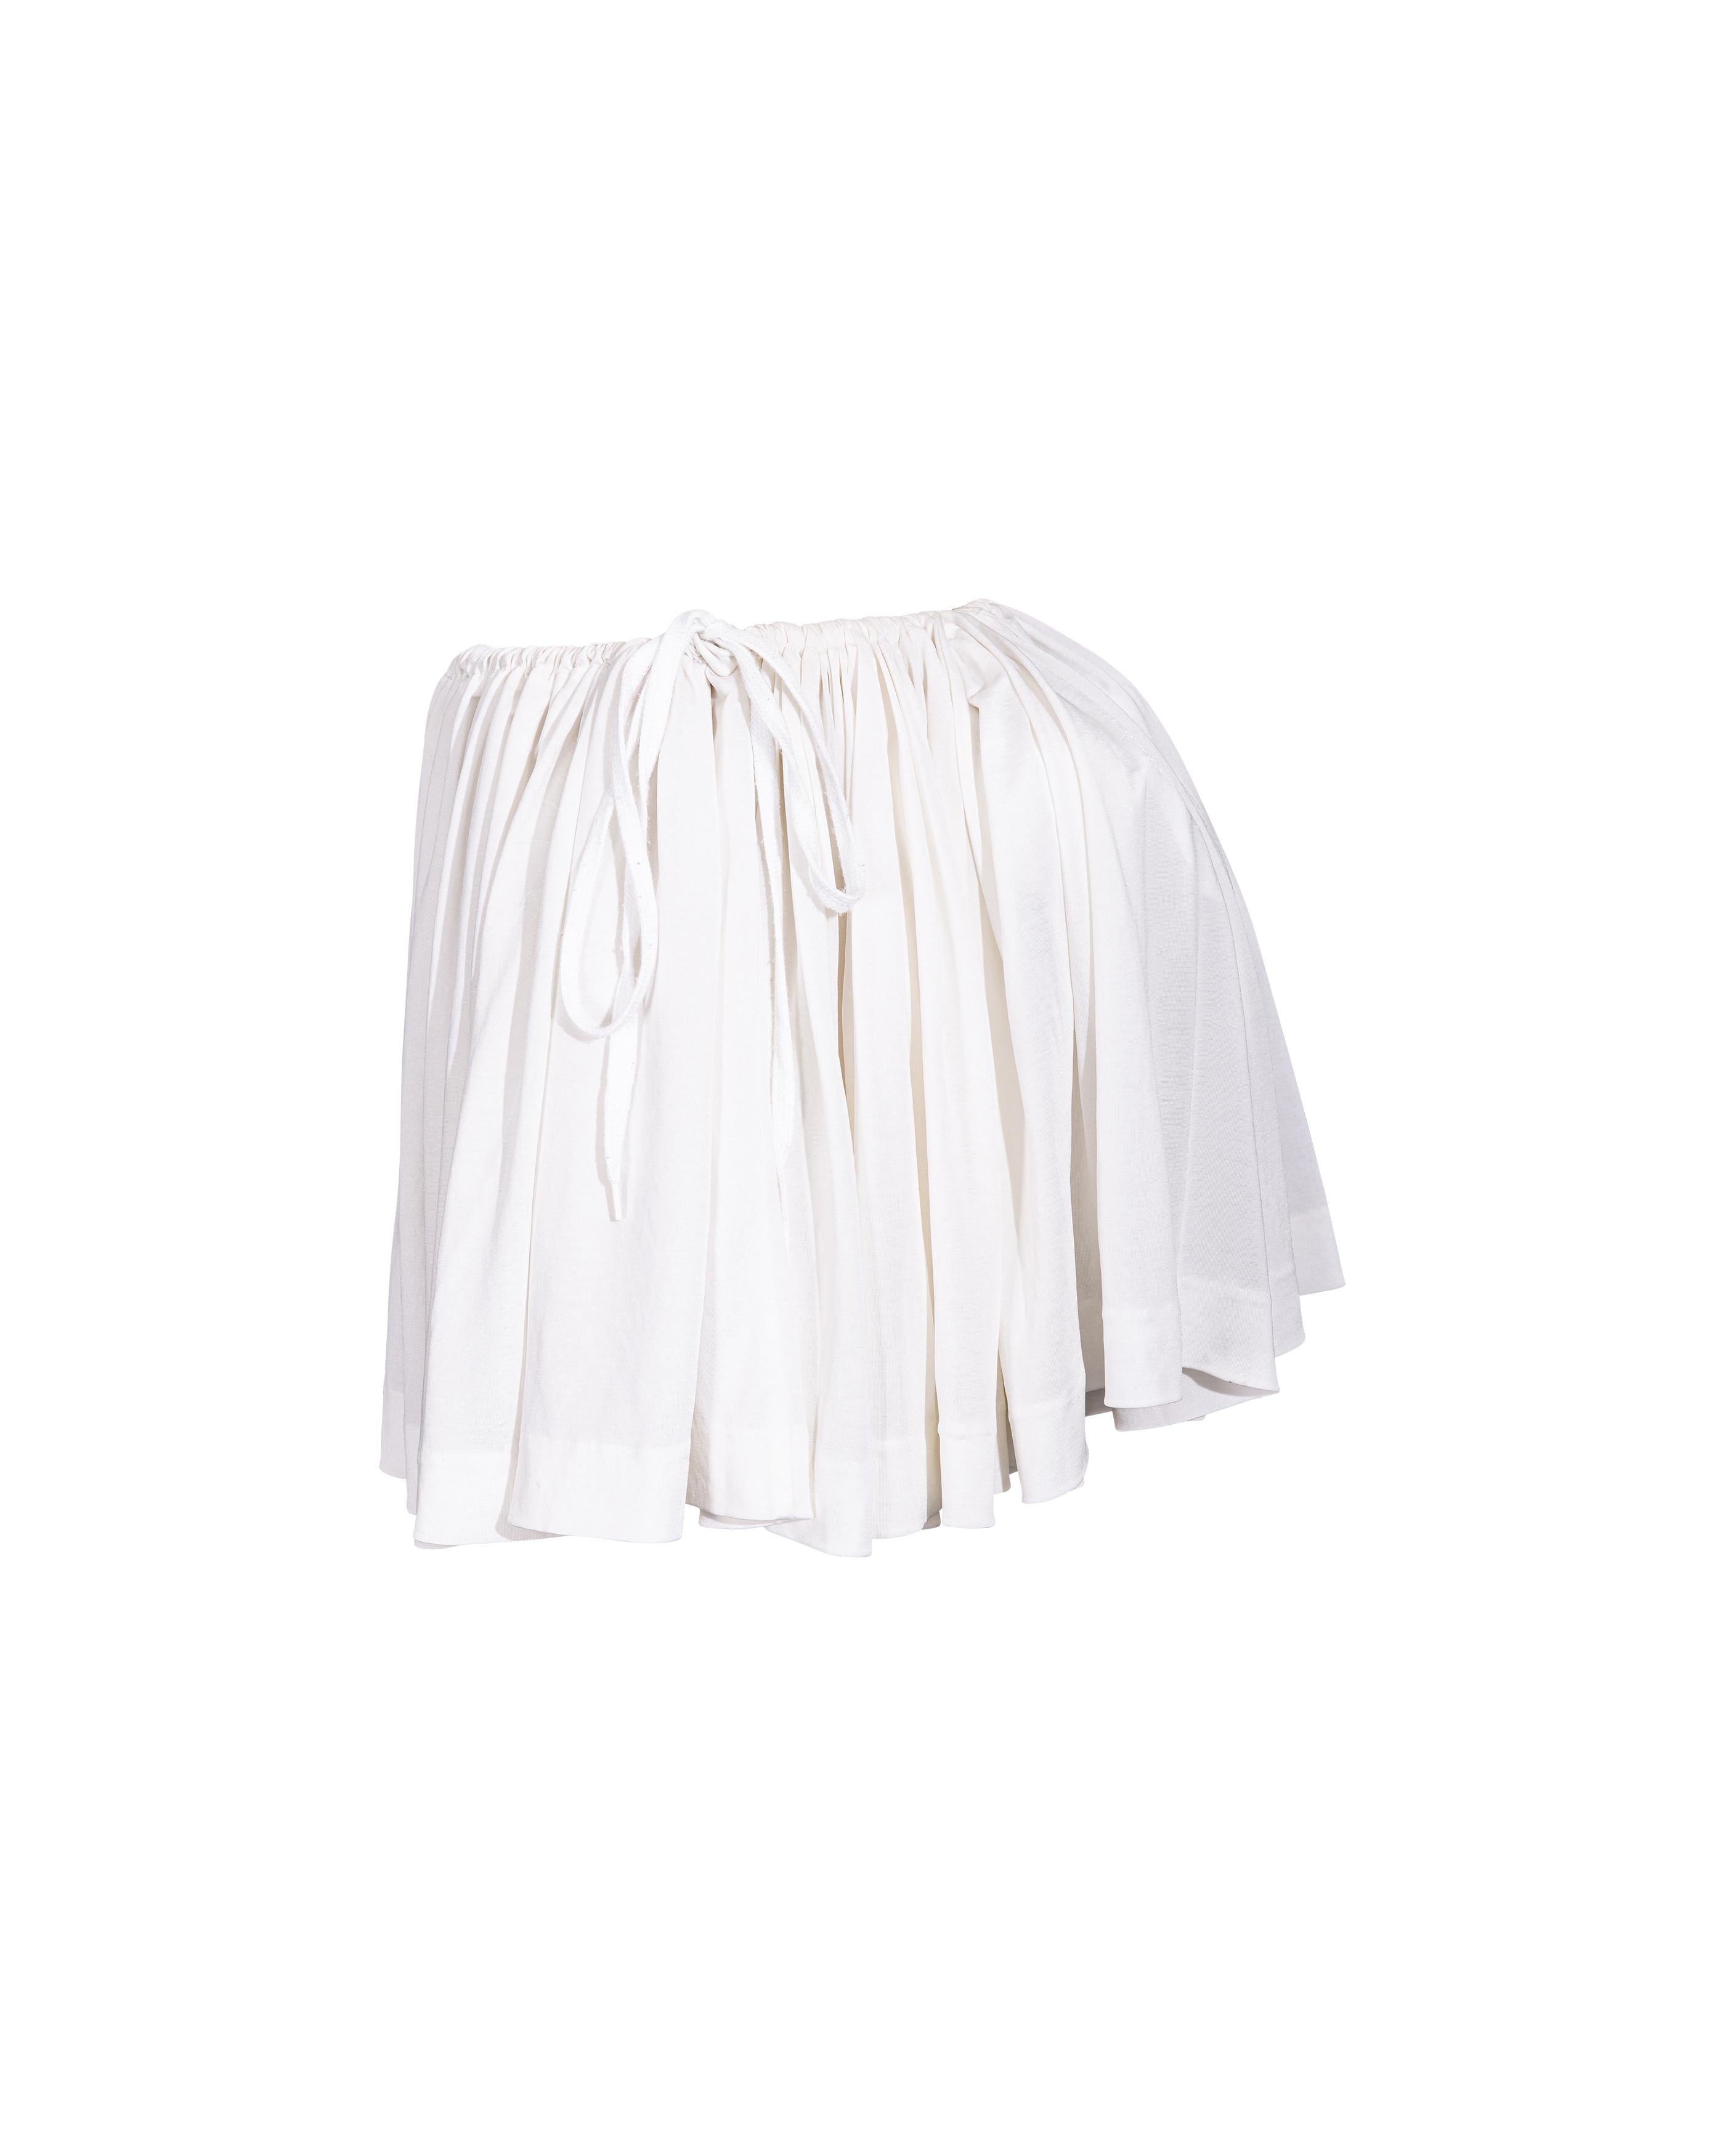 Women's S/S 1988 Vivienne Westwood White Mini Skirt with Removable Bustle